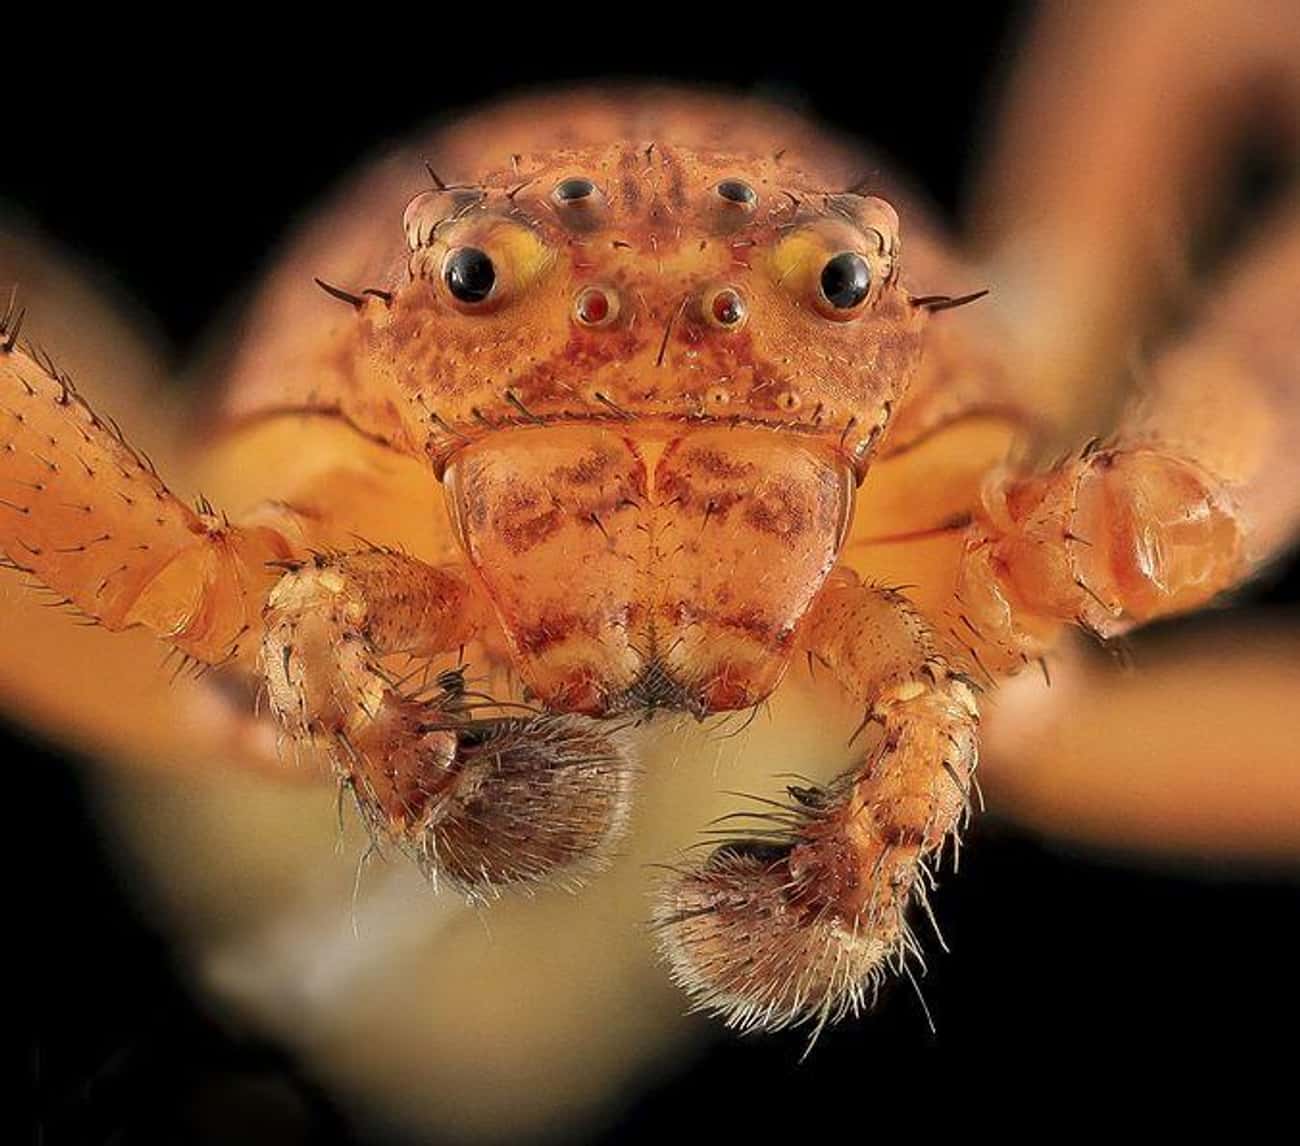 For A Crabby Spider, This One Looks Pretty Chill